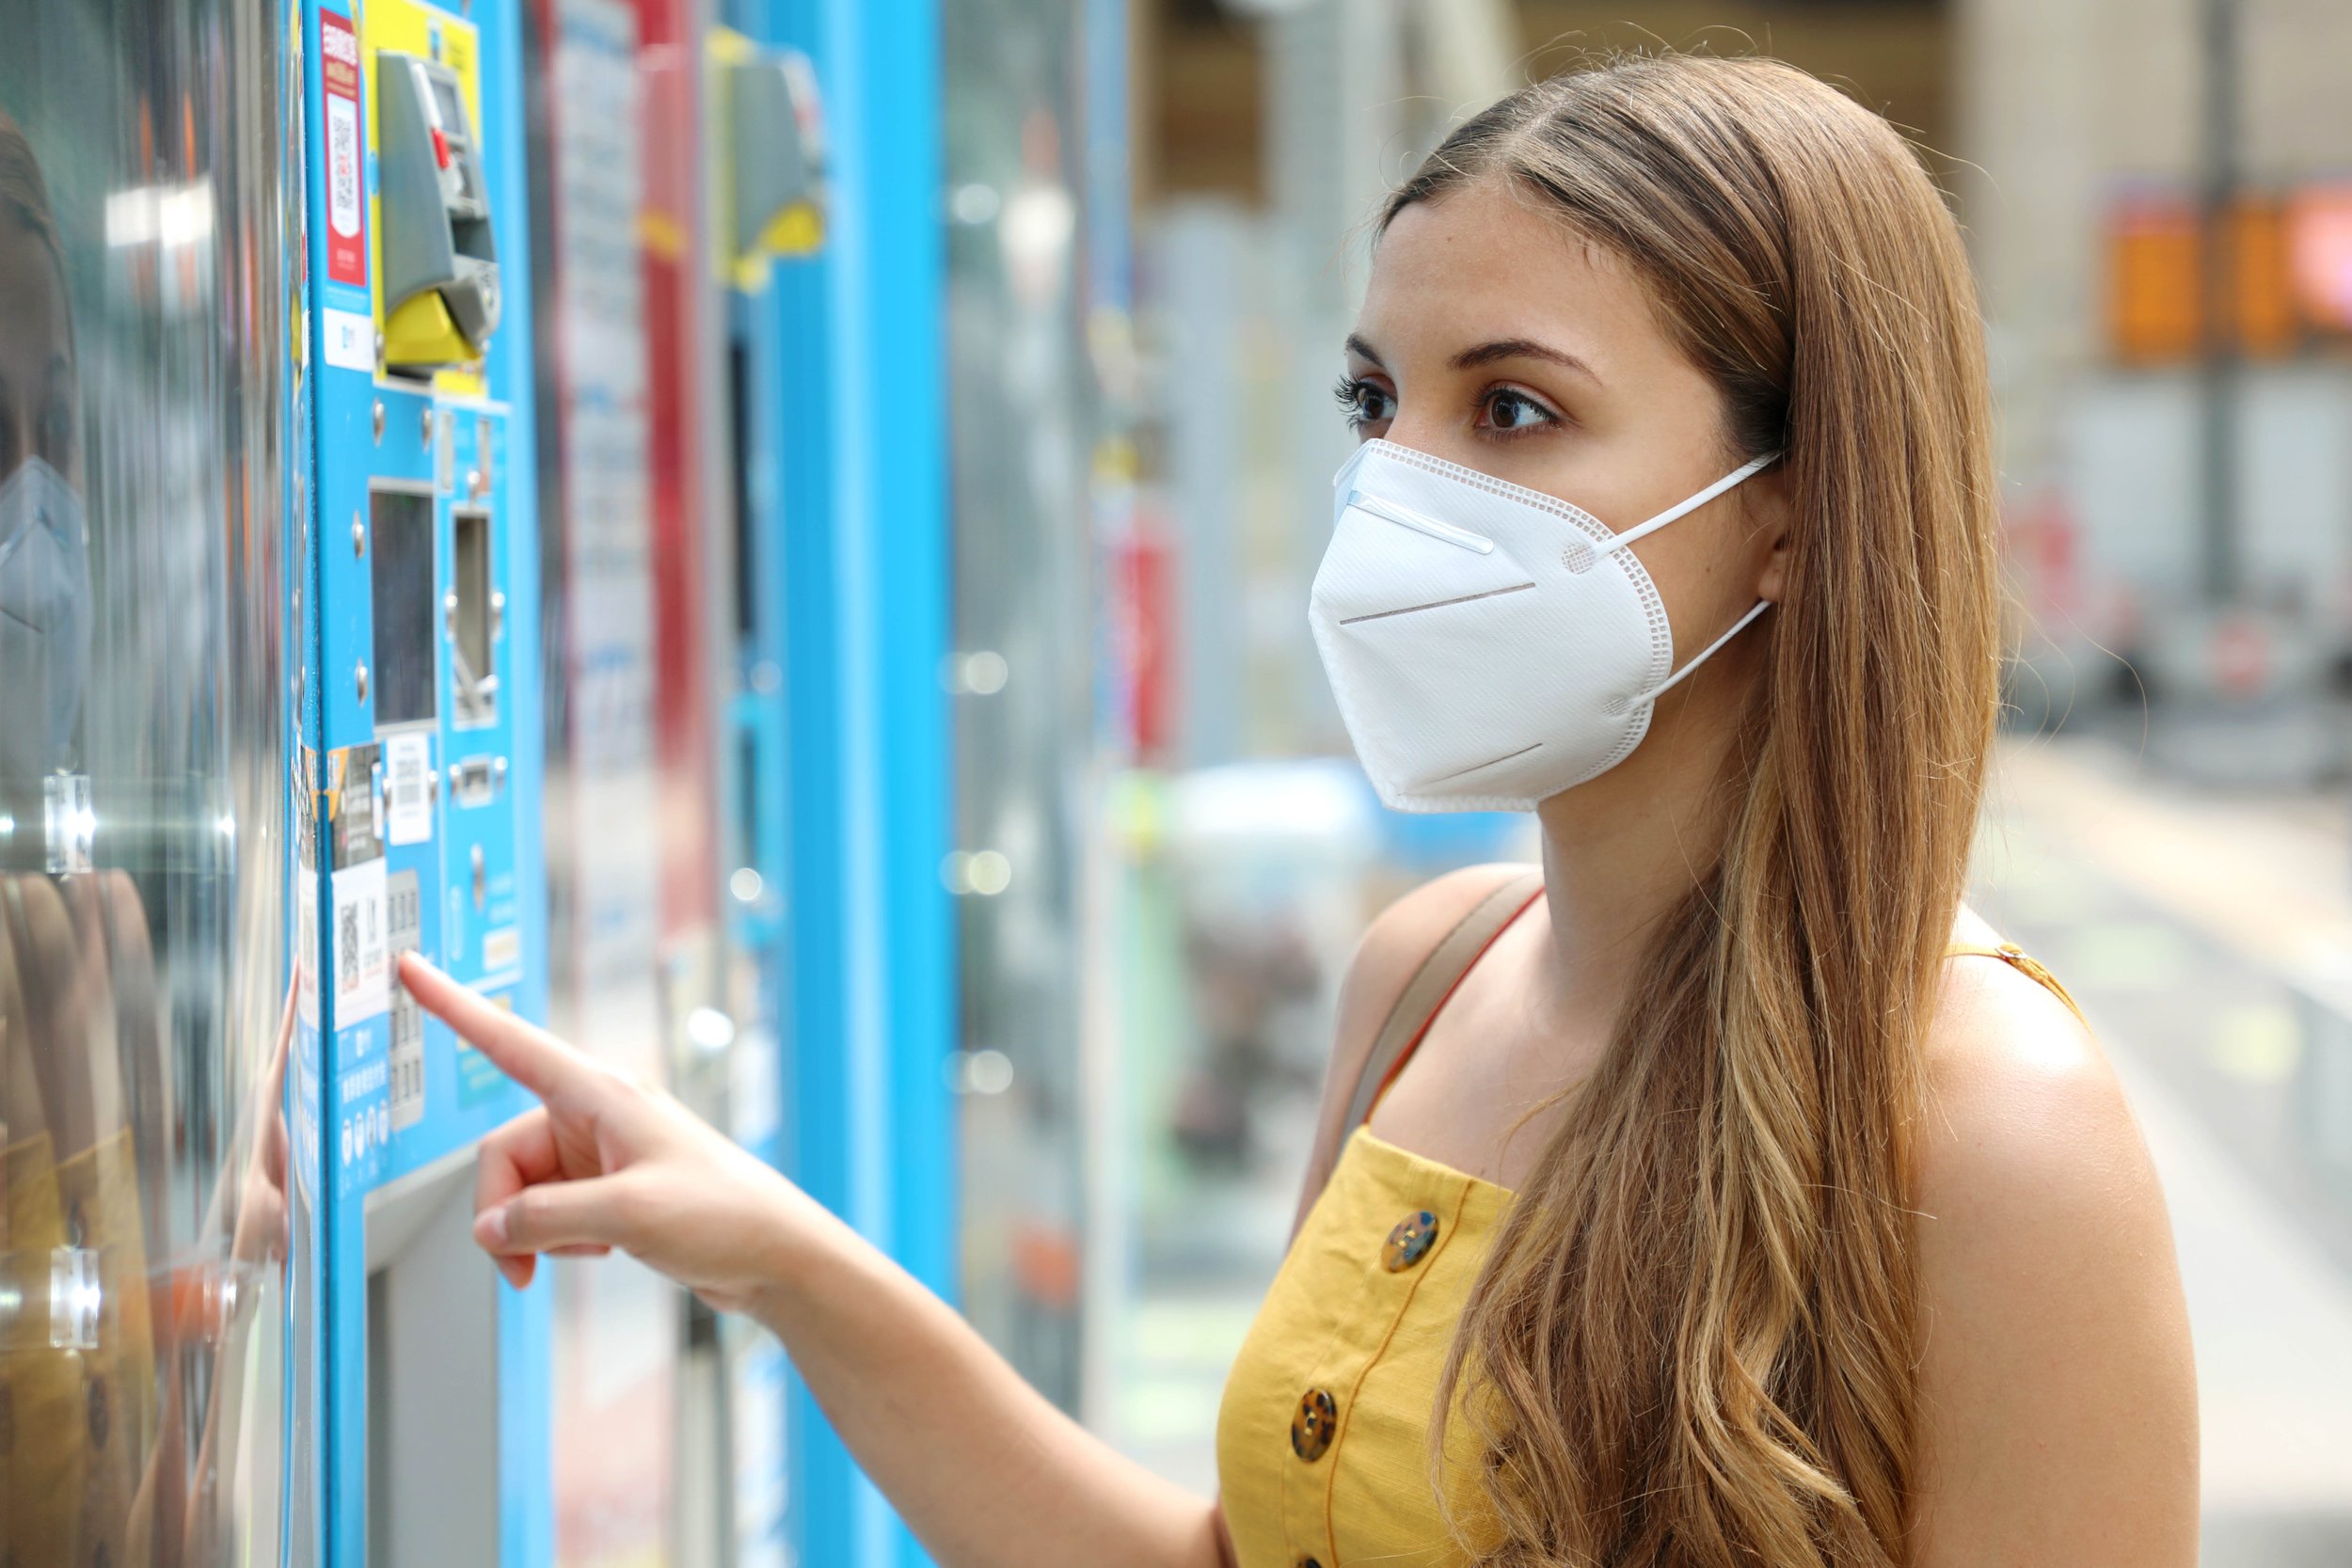 portrait-young-woman-with-protective-mask-kn95-ffp2-choosing-snack-drink-vending-machine-train-station-vending-machine-with-girl (1).jpg